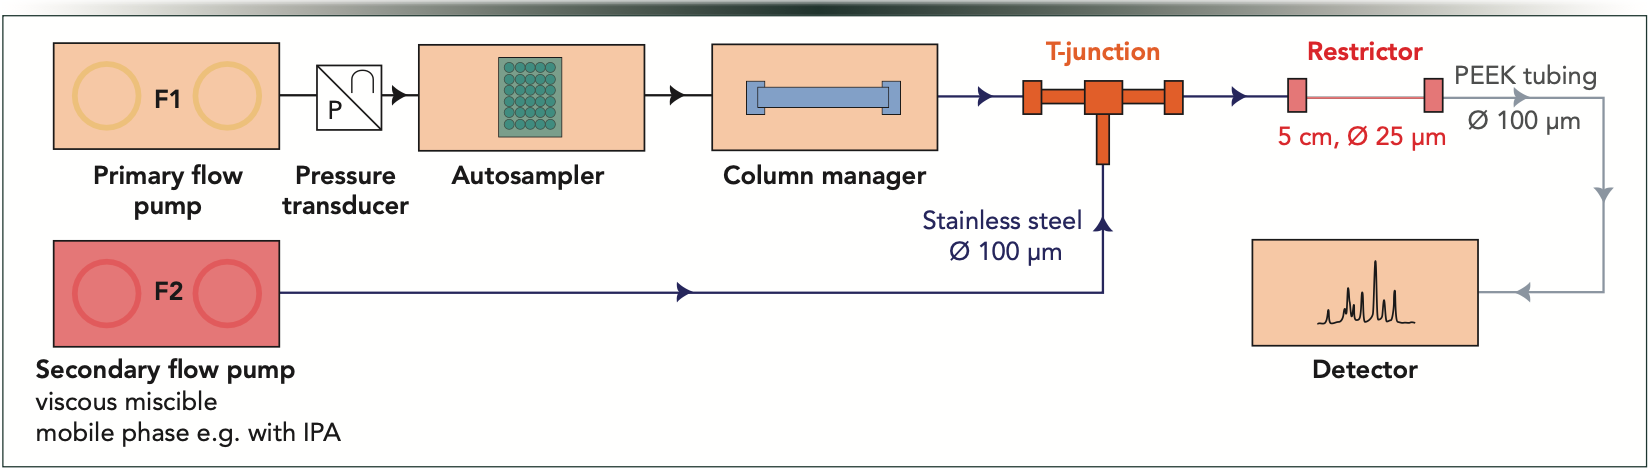 Figure 1: Schematic illustration of the PE-LC system used in this work. From left to right: F1 is the primary flow rate controlled by the primary flow pump, F2 is the secondary flow rate controlled by the secondary flow pump, pressure transducer, autosampler, column manager and column, T-junction, restrictor, and detector.